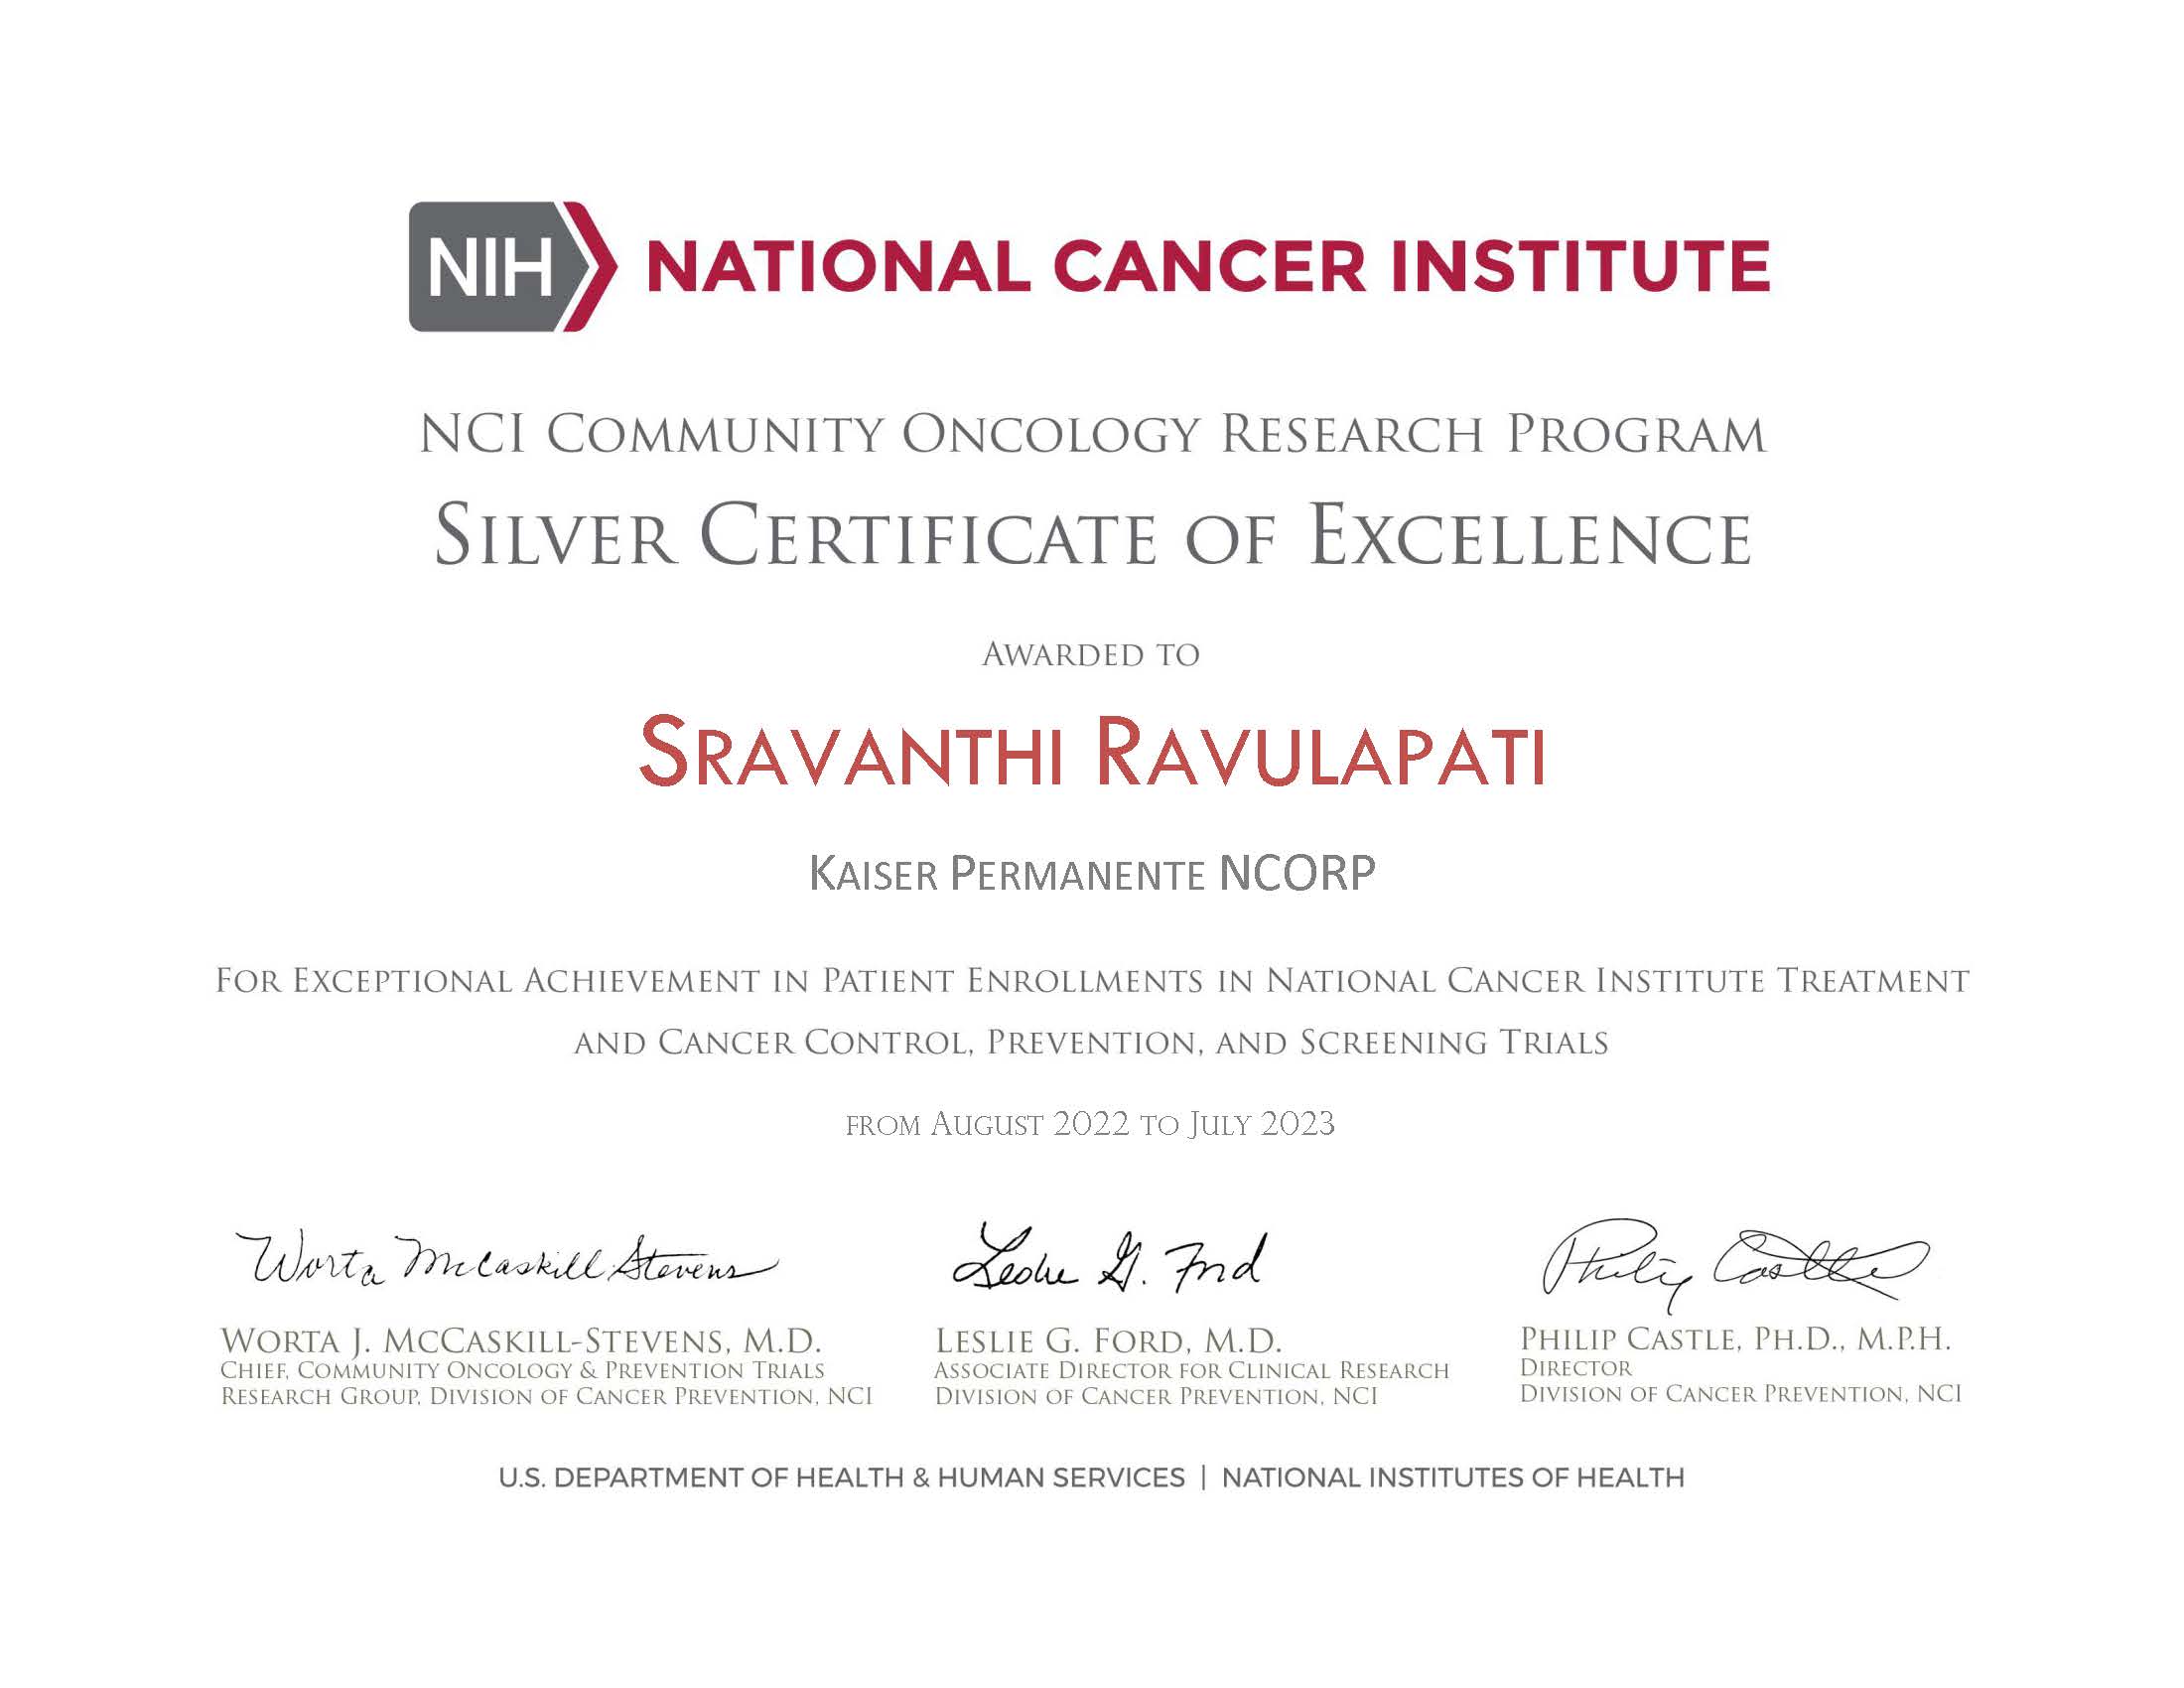 Image of Dr. Ravulapati's Silver Certificate of Excellence for their exceptional achievement in clinical trial participation.